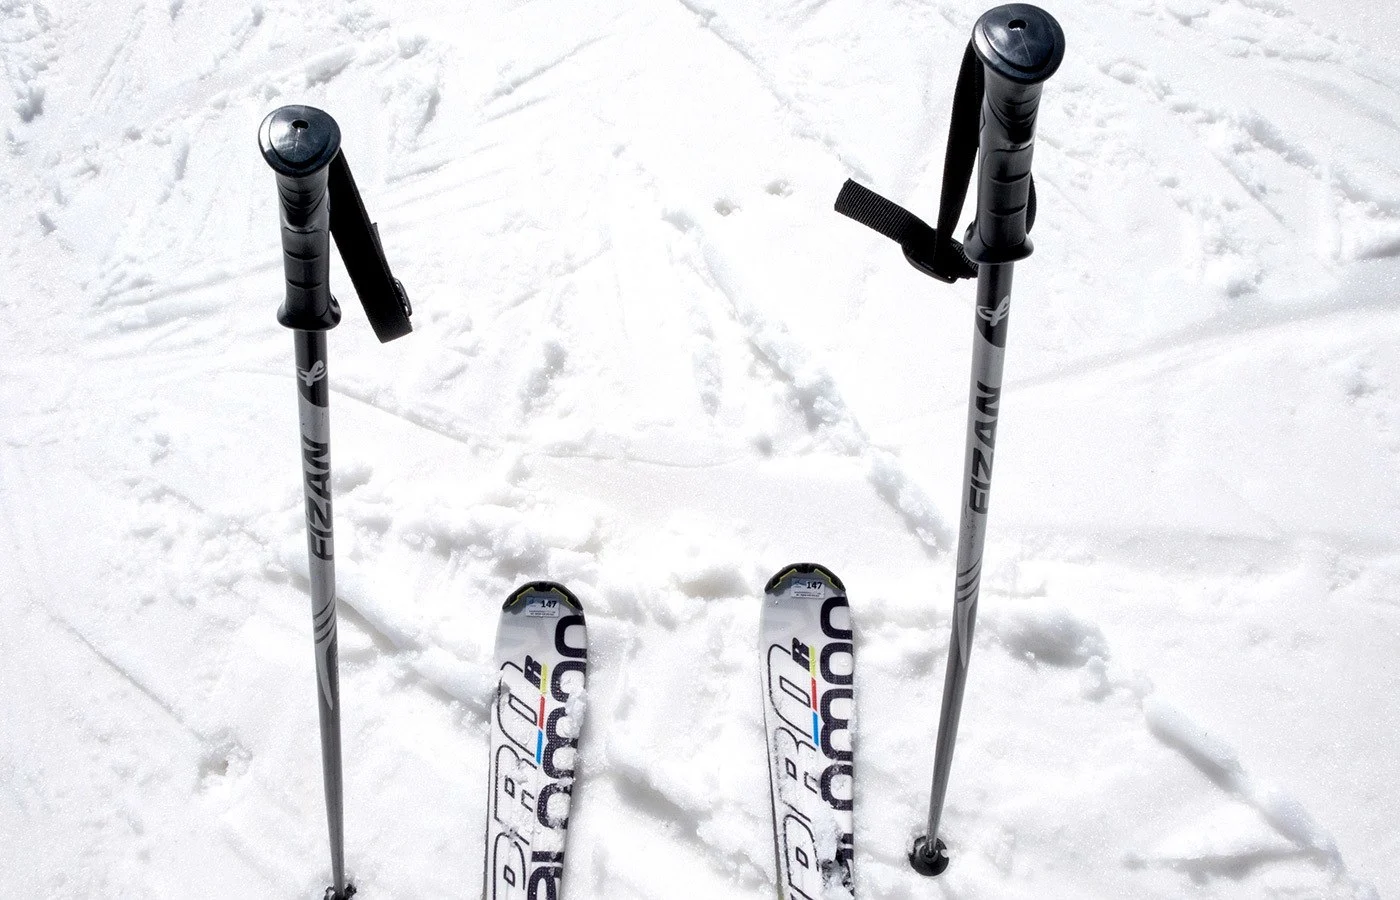 Skis and poles in the snow while skiing in Bulgaria